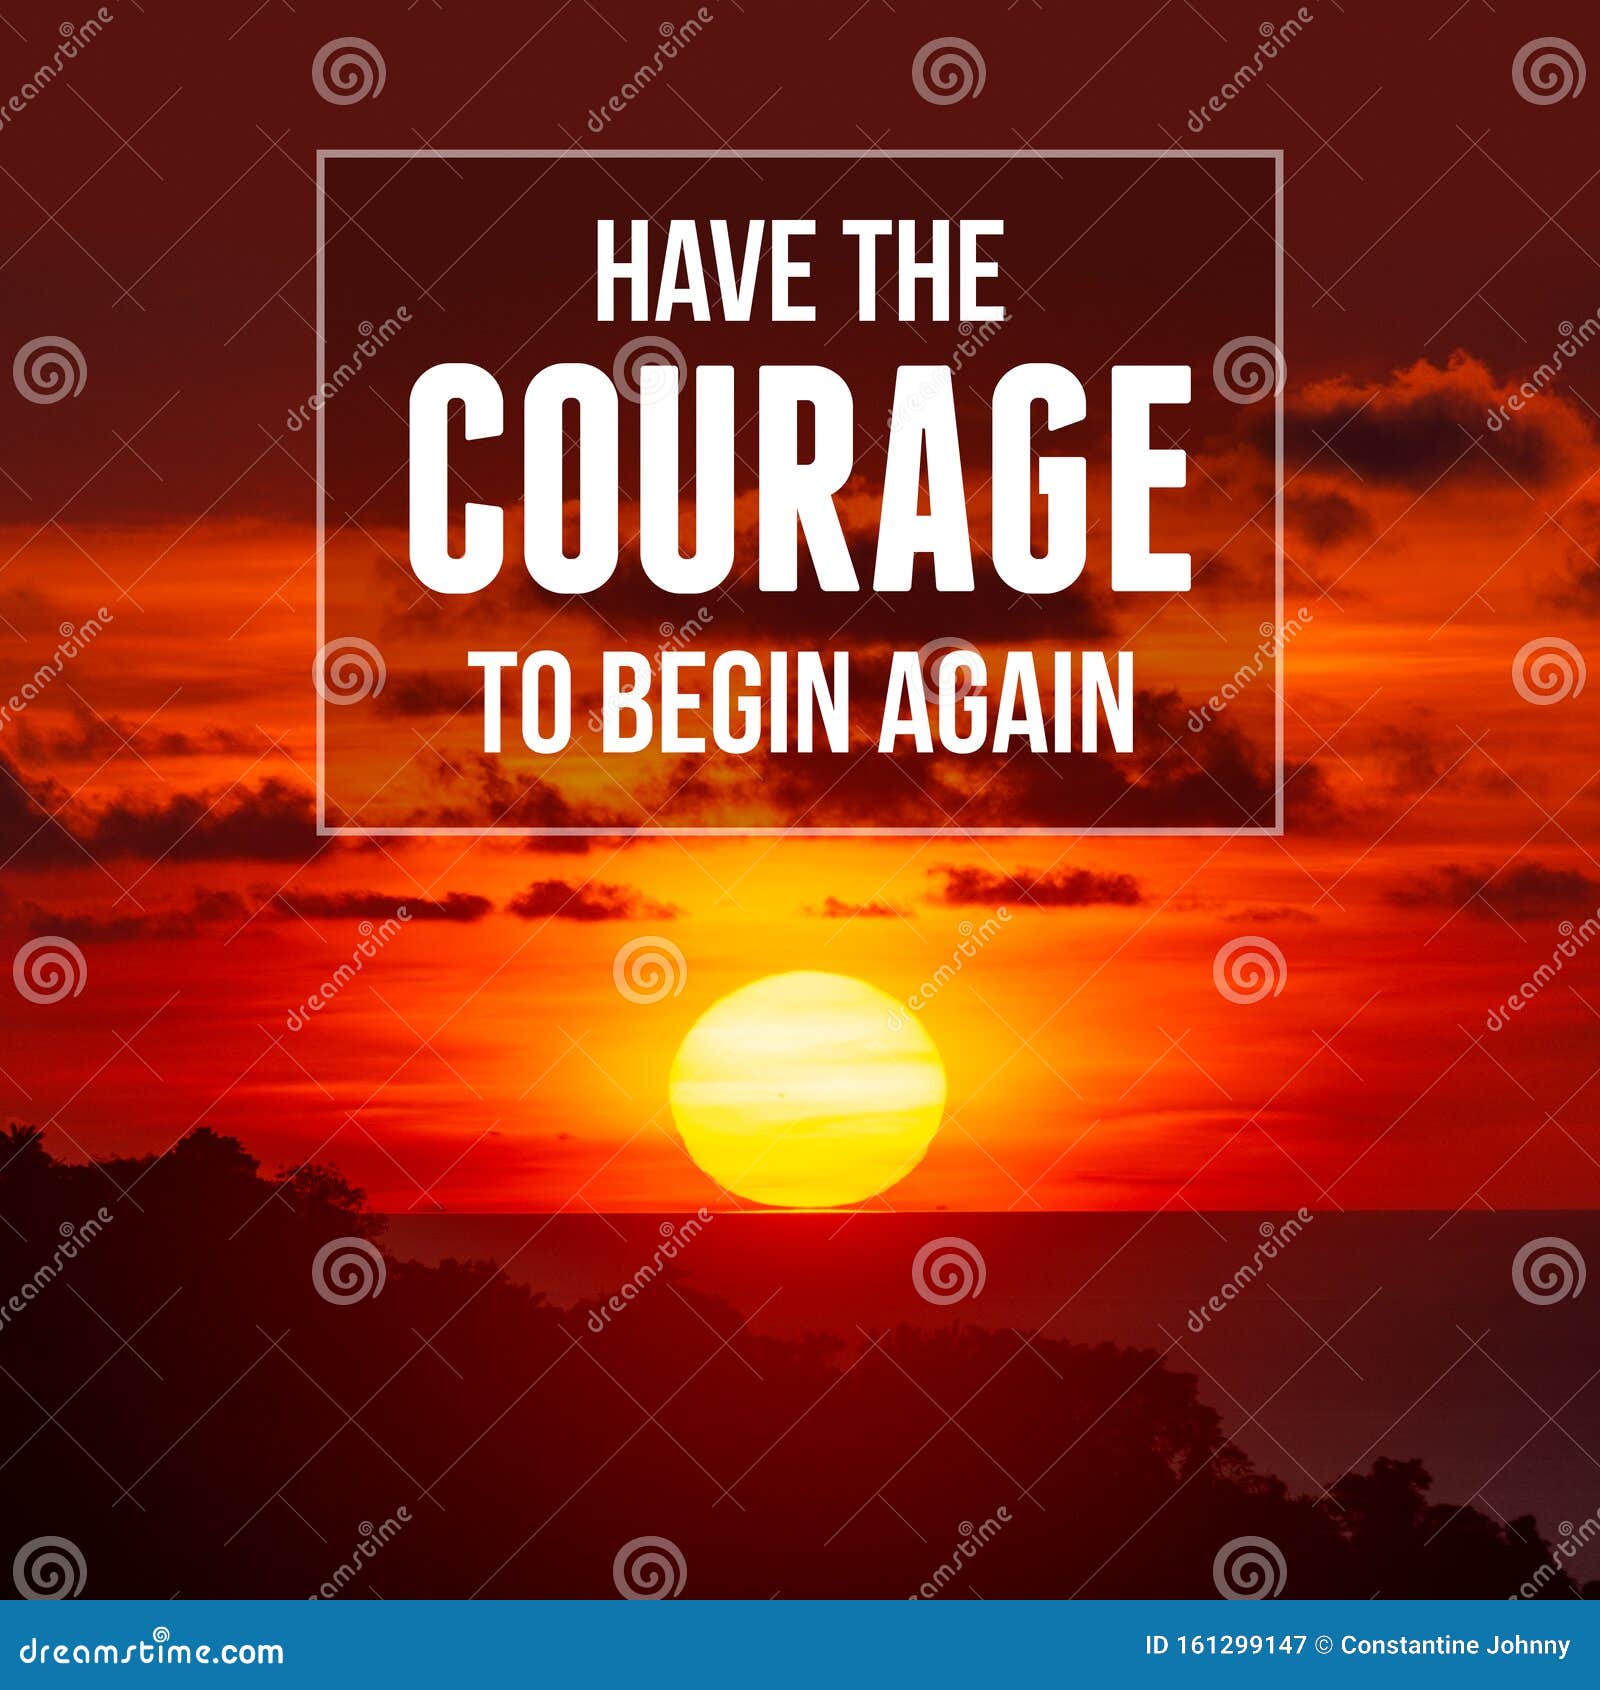 inspirational and motivational quote. have the courage to begin again